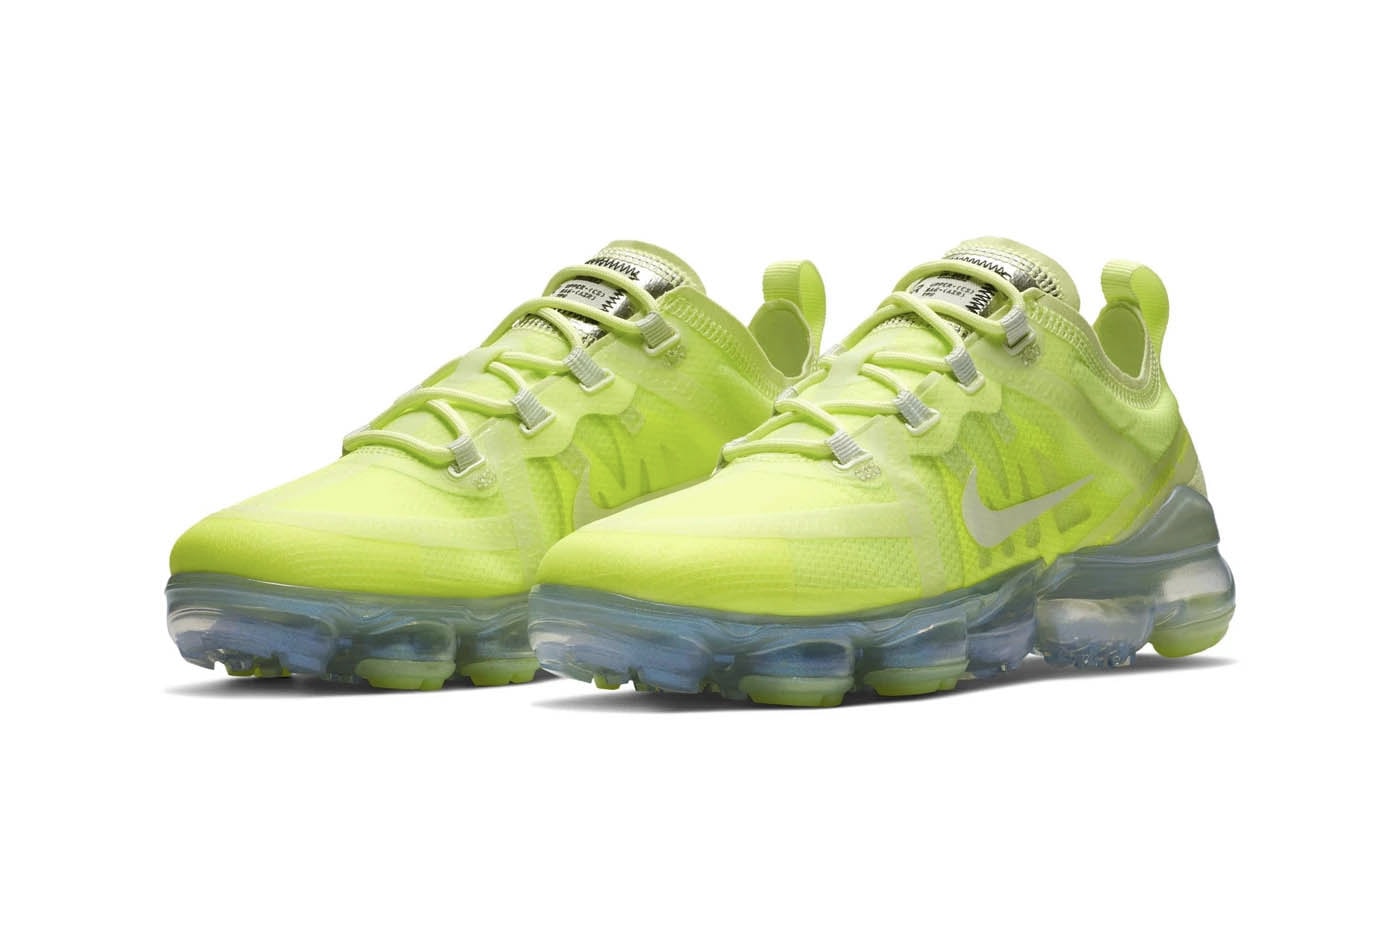 Nike's New Air VaporMax 2019 in "Volt Glow" Yellow Green 